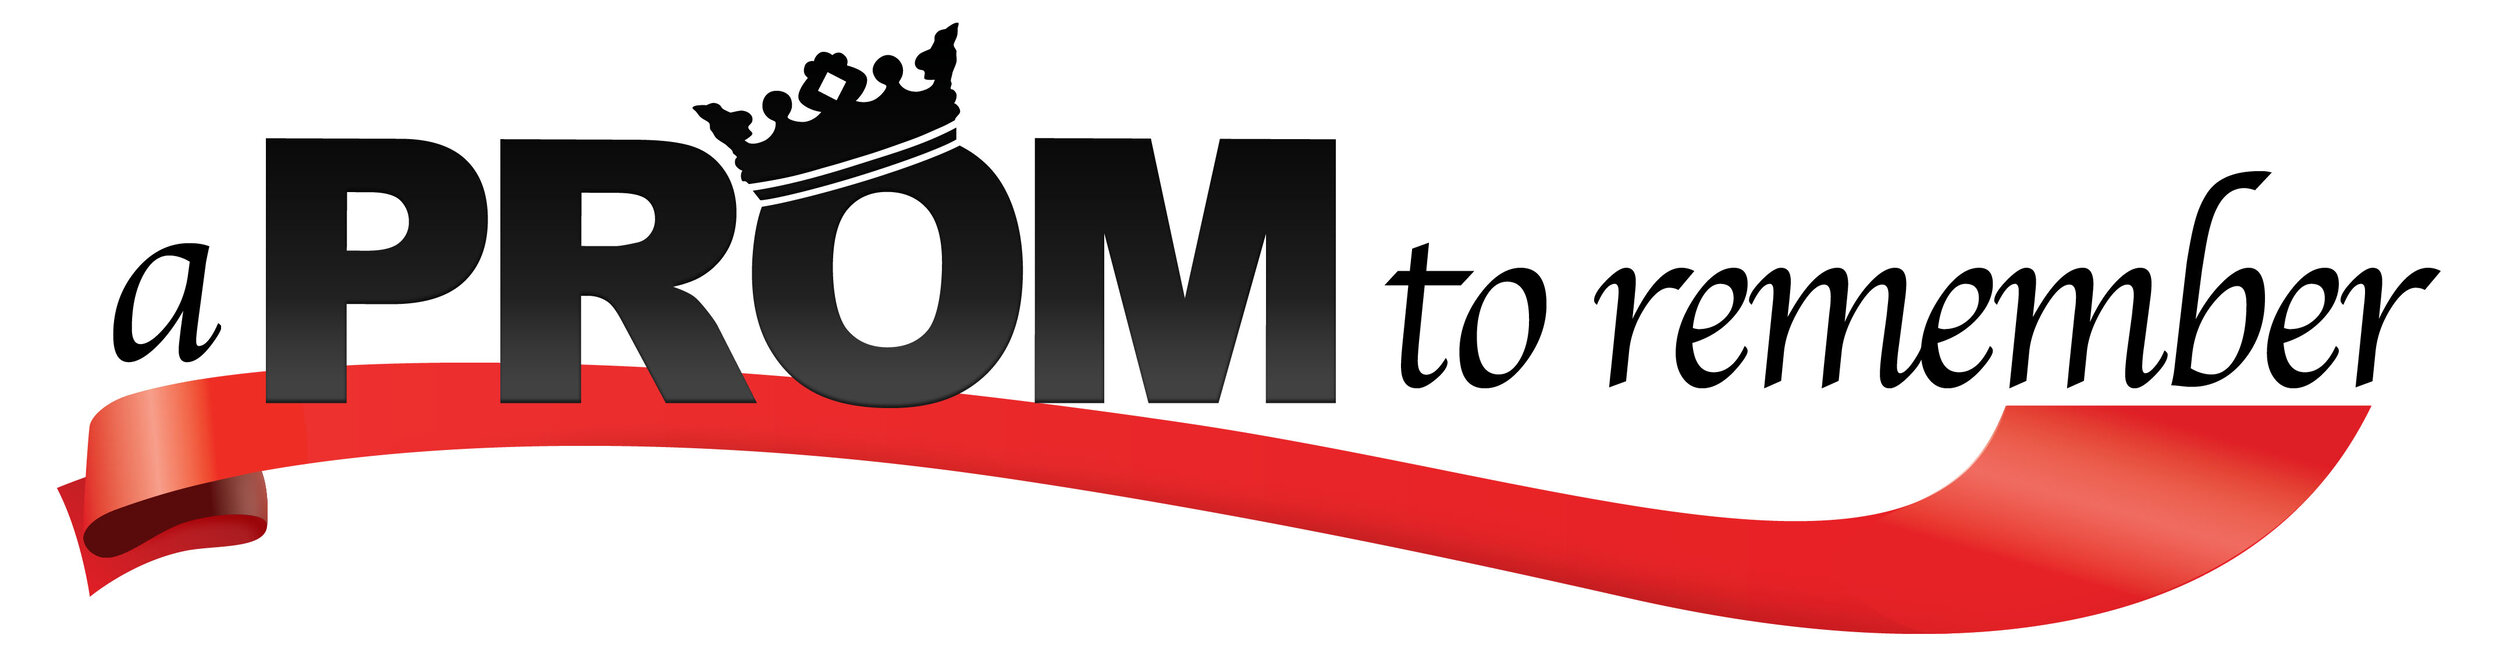 A-Prom-to-Remember-logo.jpg